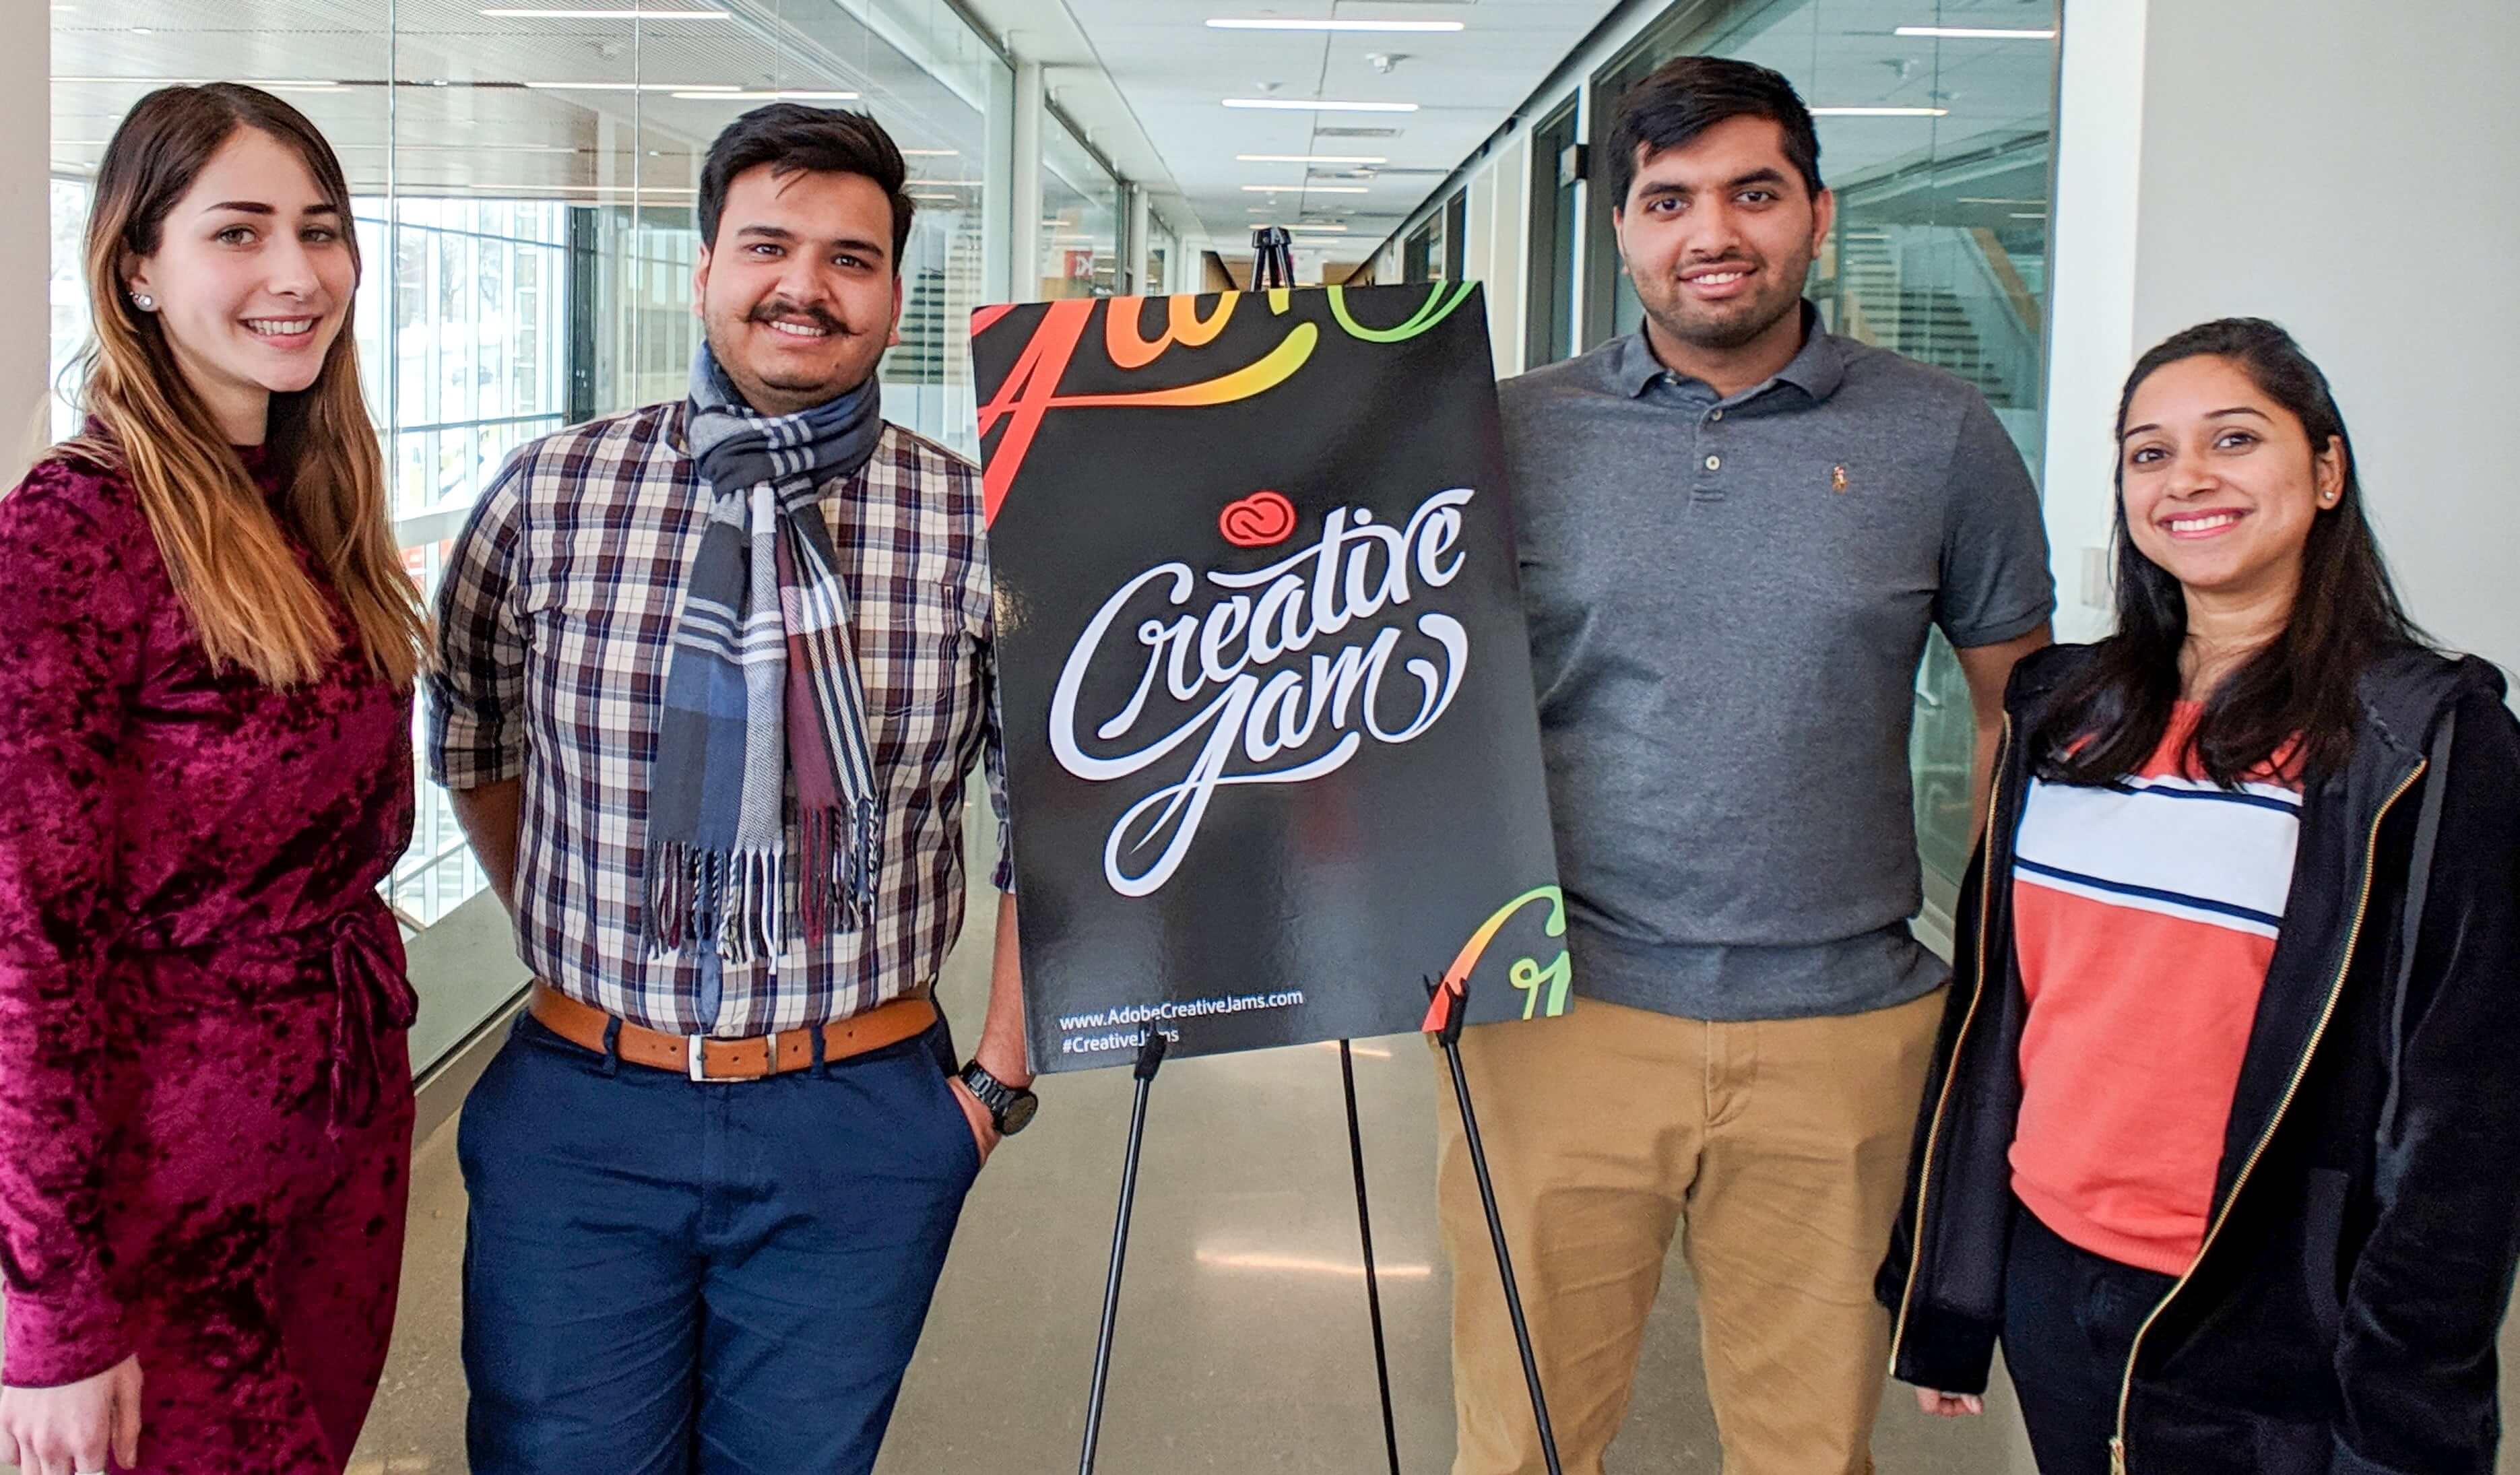 First-place Winners of the Adobe Creative Jam for Students: Anita Srivastava (Business Administration - Marketing), Rajat Bhatia (Business), Taha Dharamsi (Marketing), and Pragati Pise (Creative Advertising)